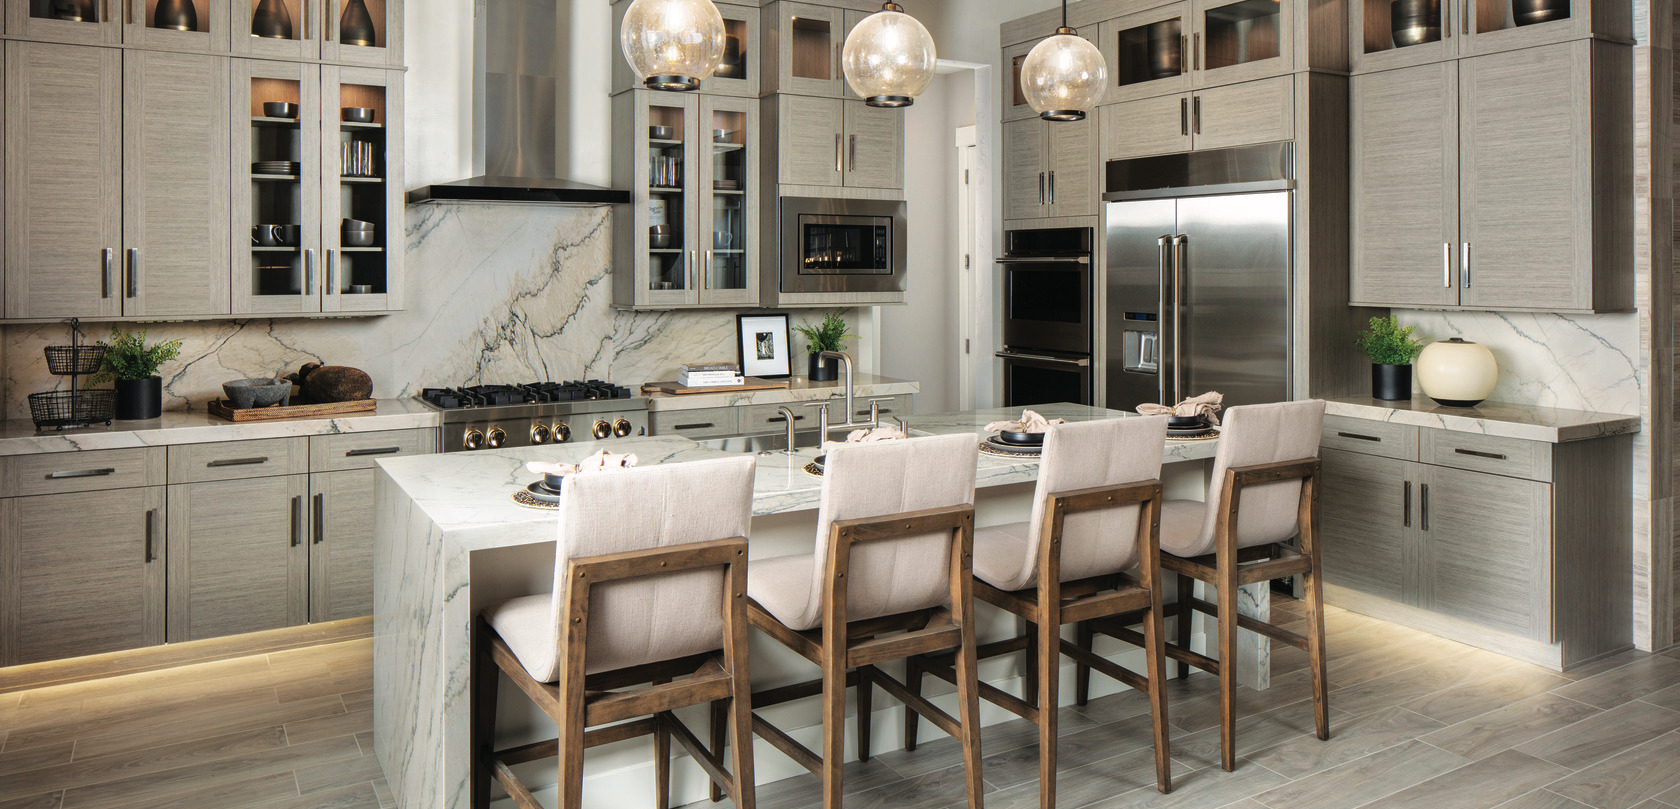 Kitchen with quartz waterfall island, pendant lighting, and neutral wood furniture